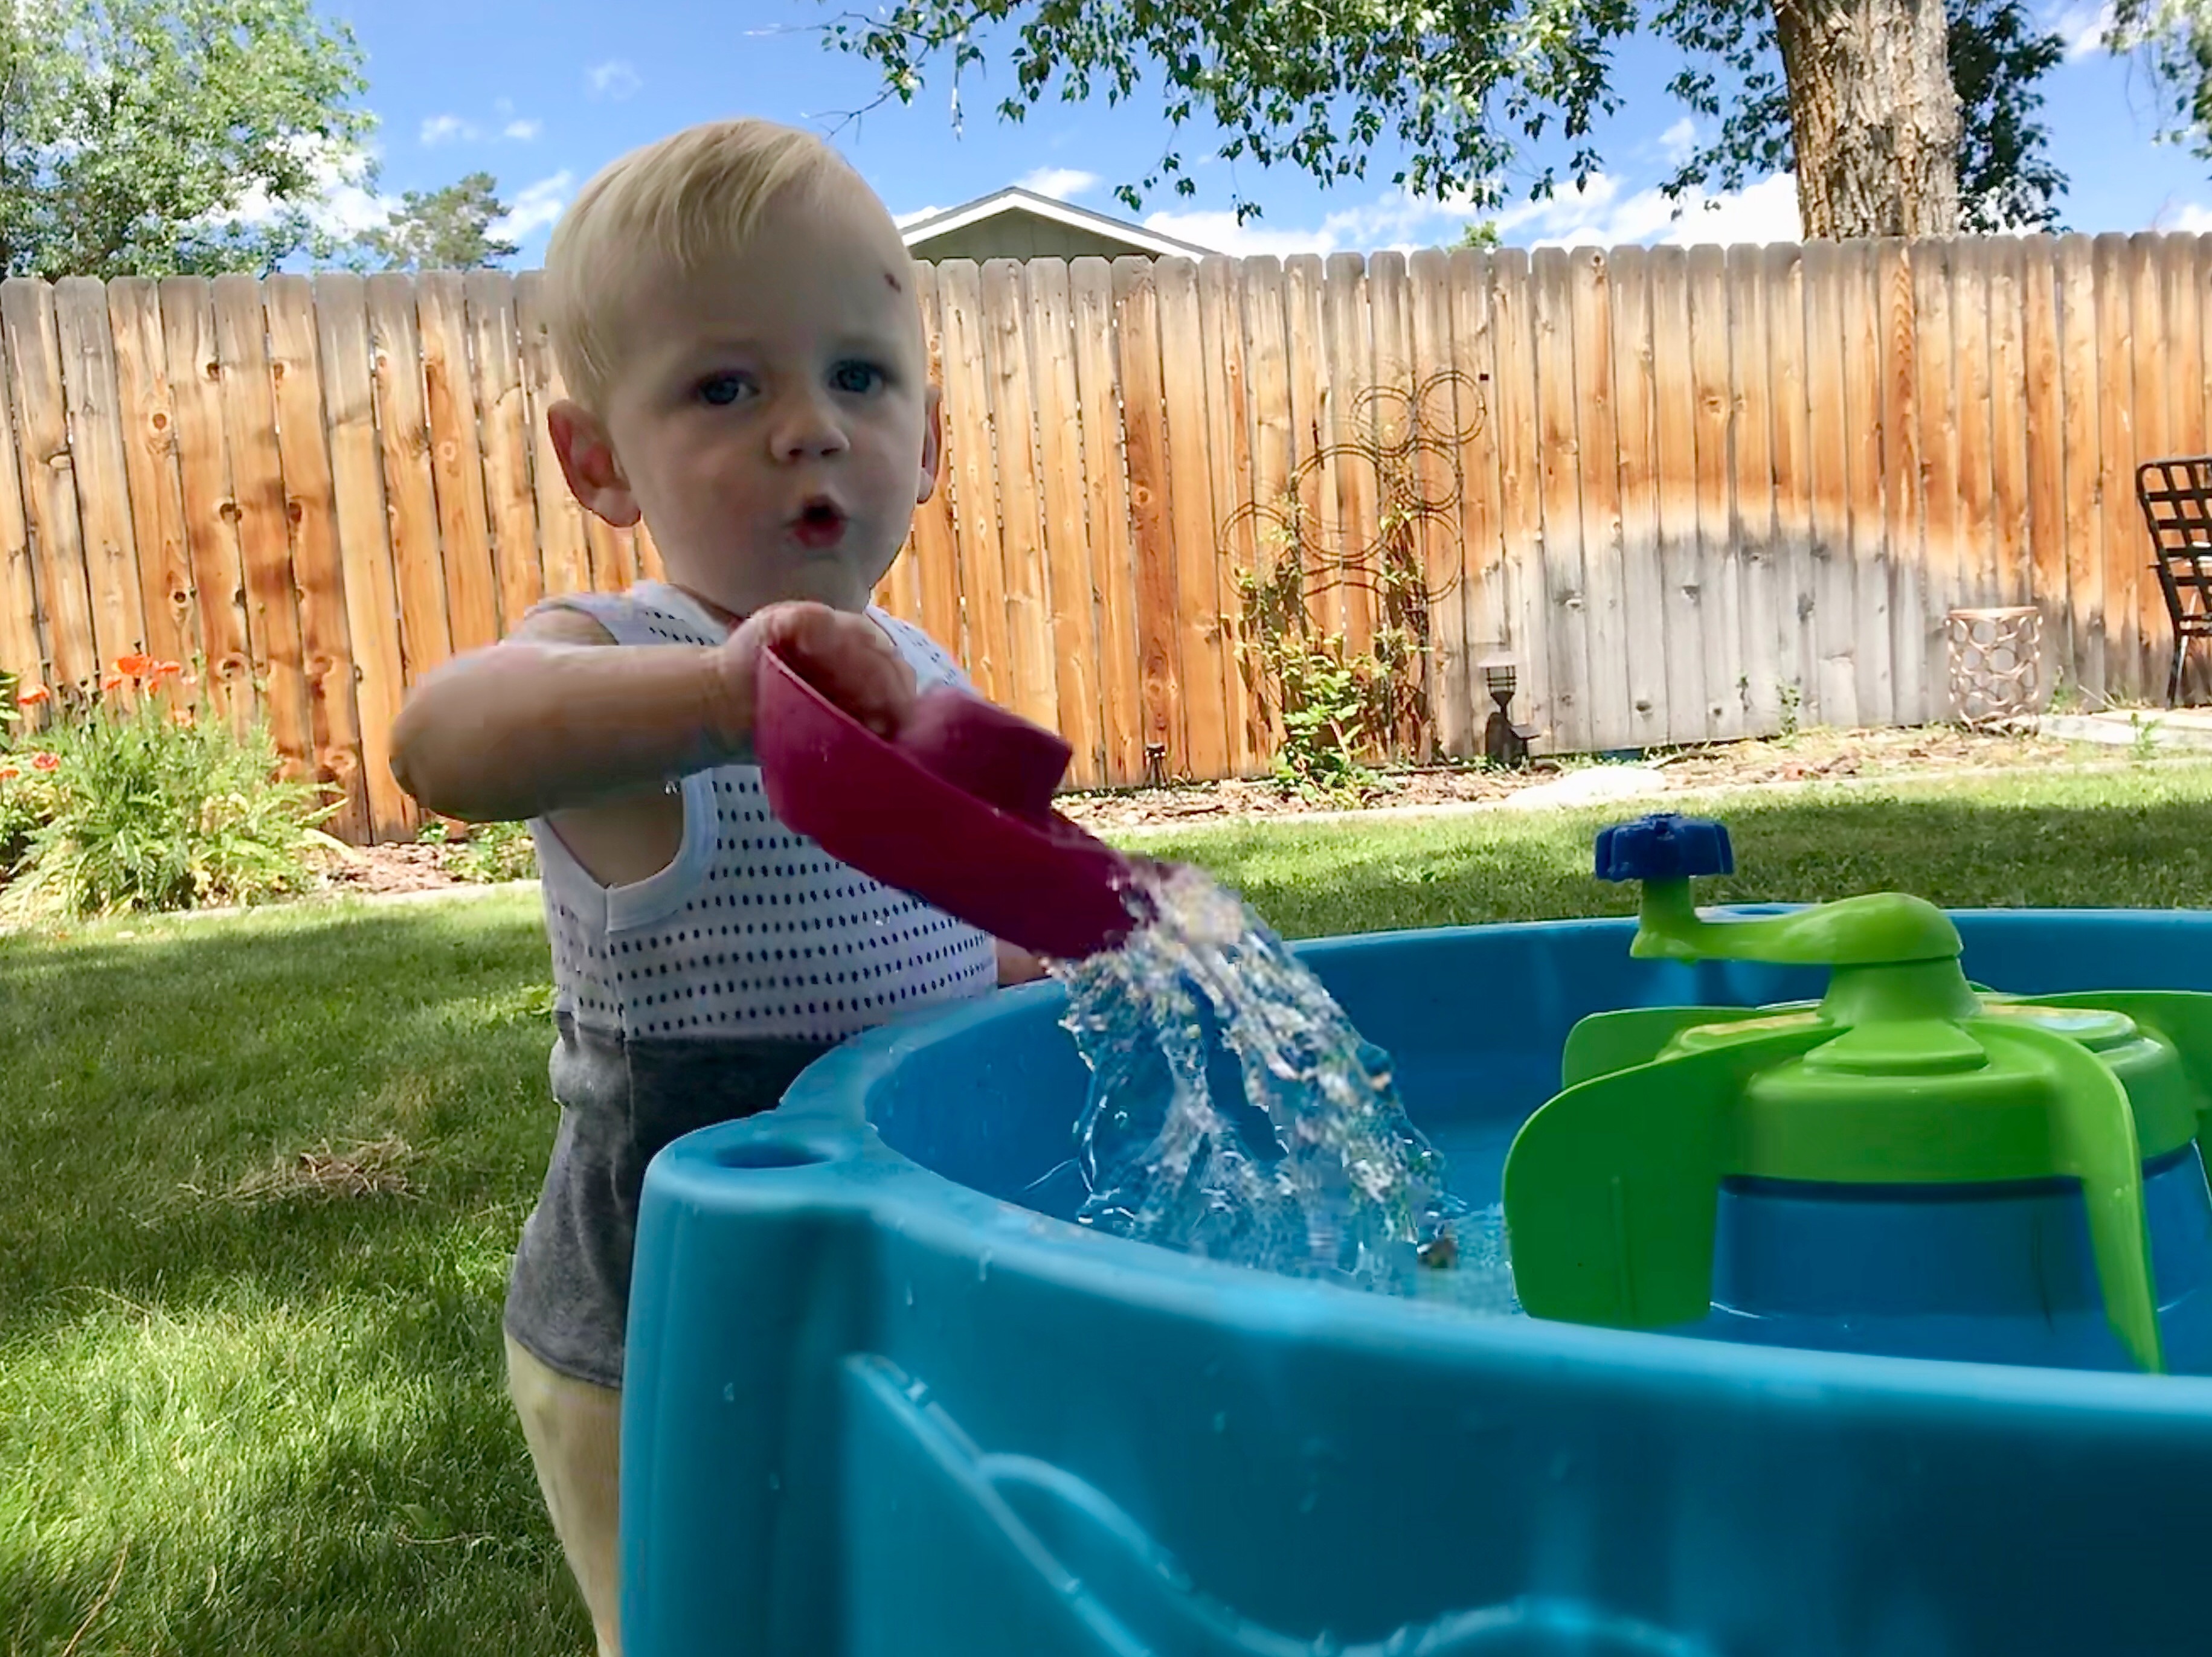 Owen playing with water at his water table.